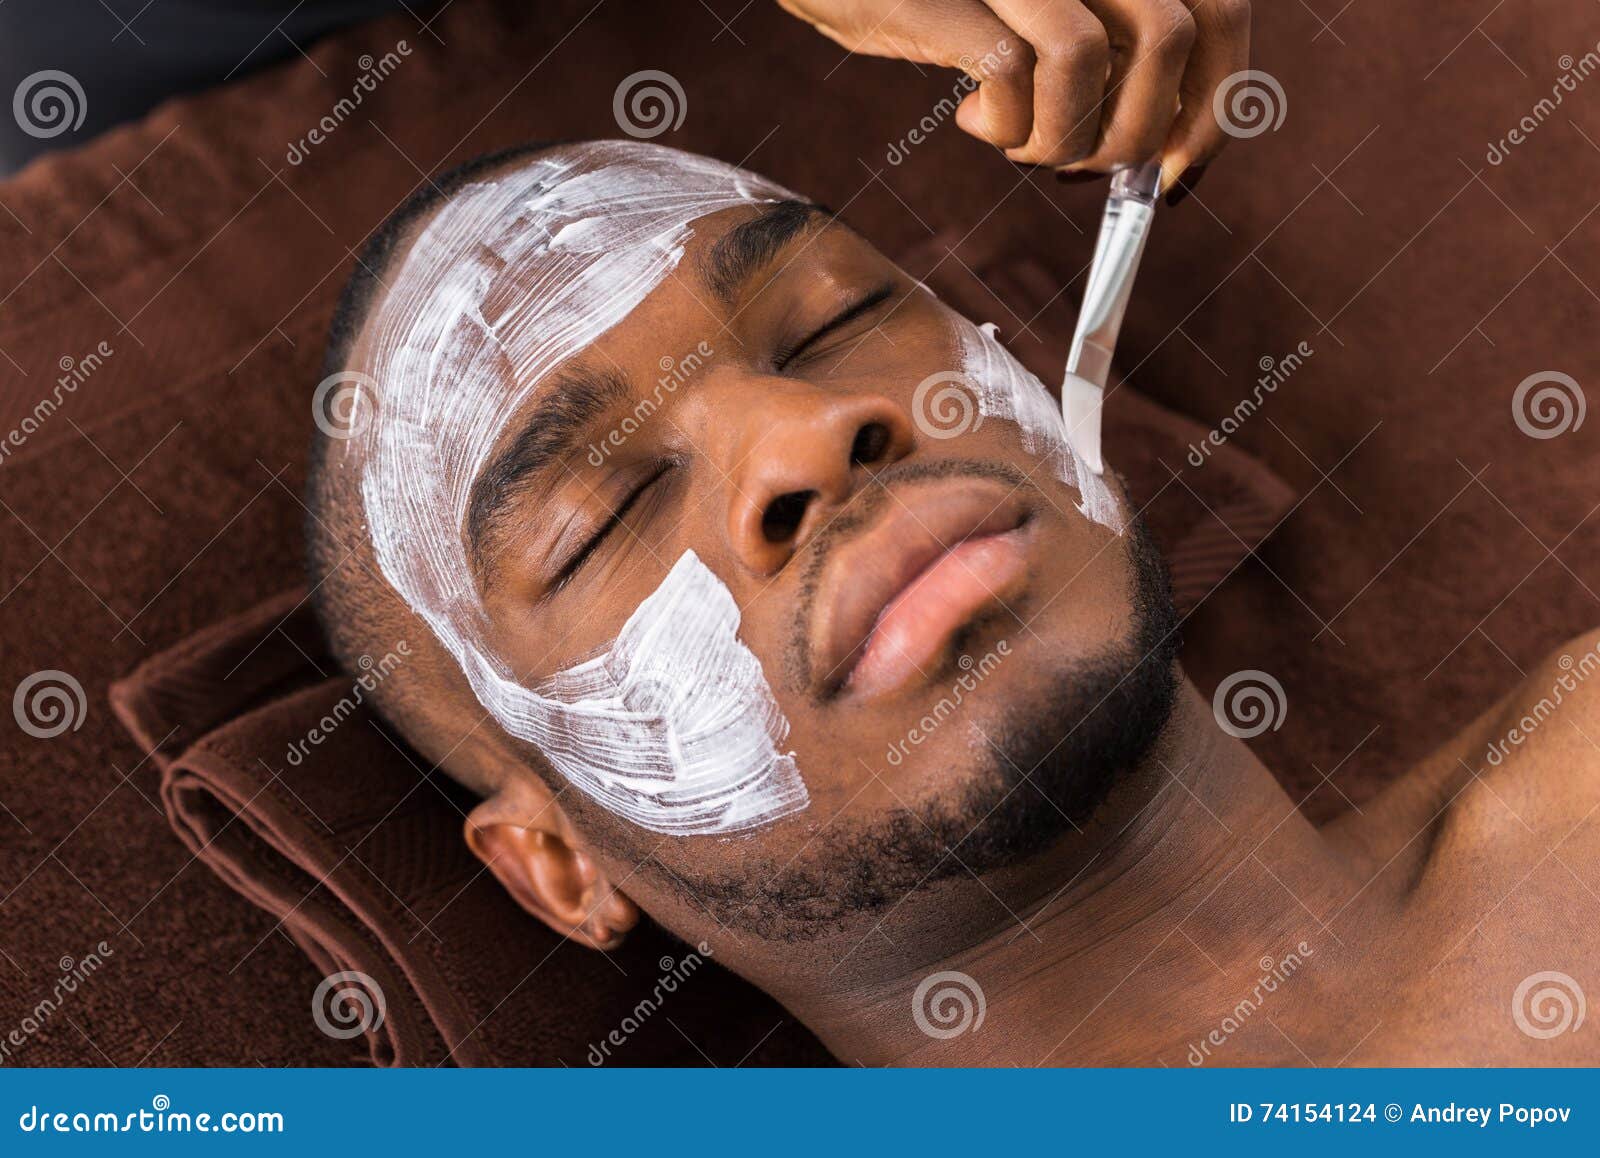 therapist applying face mask to man